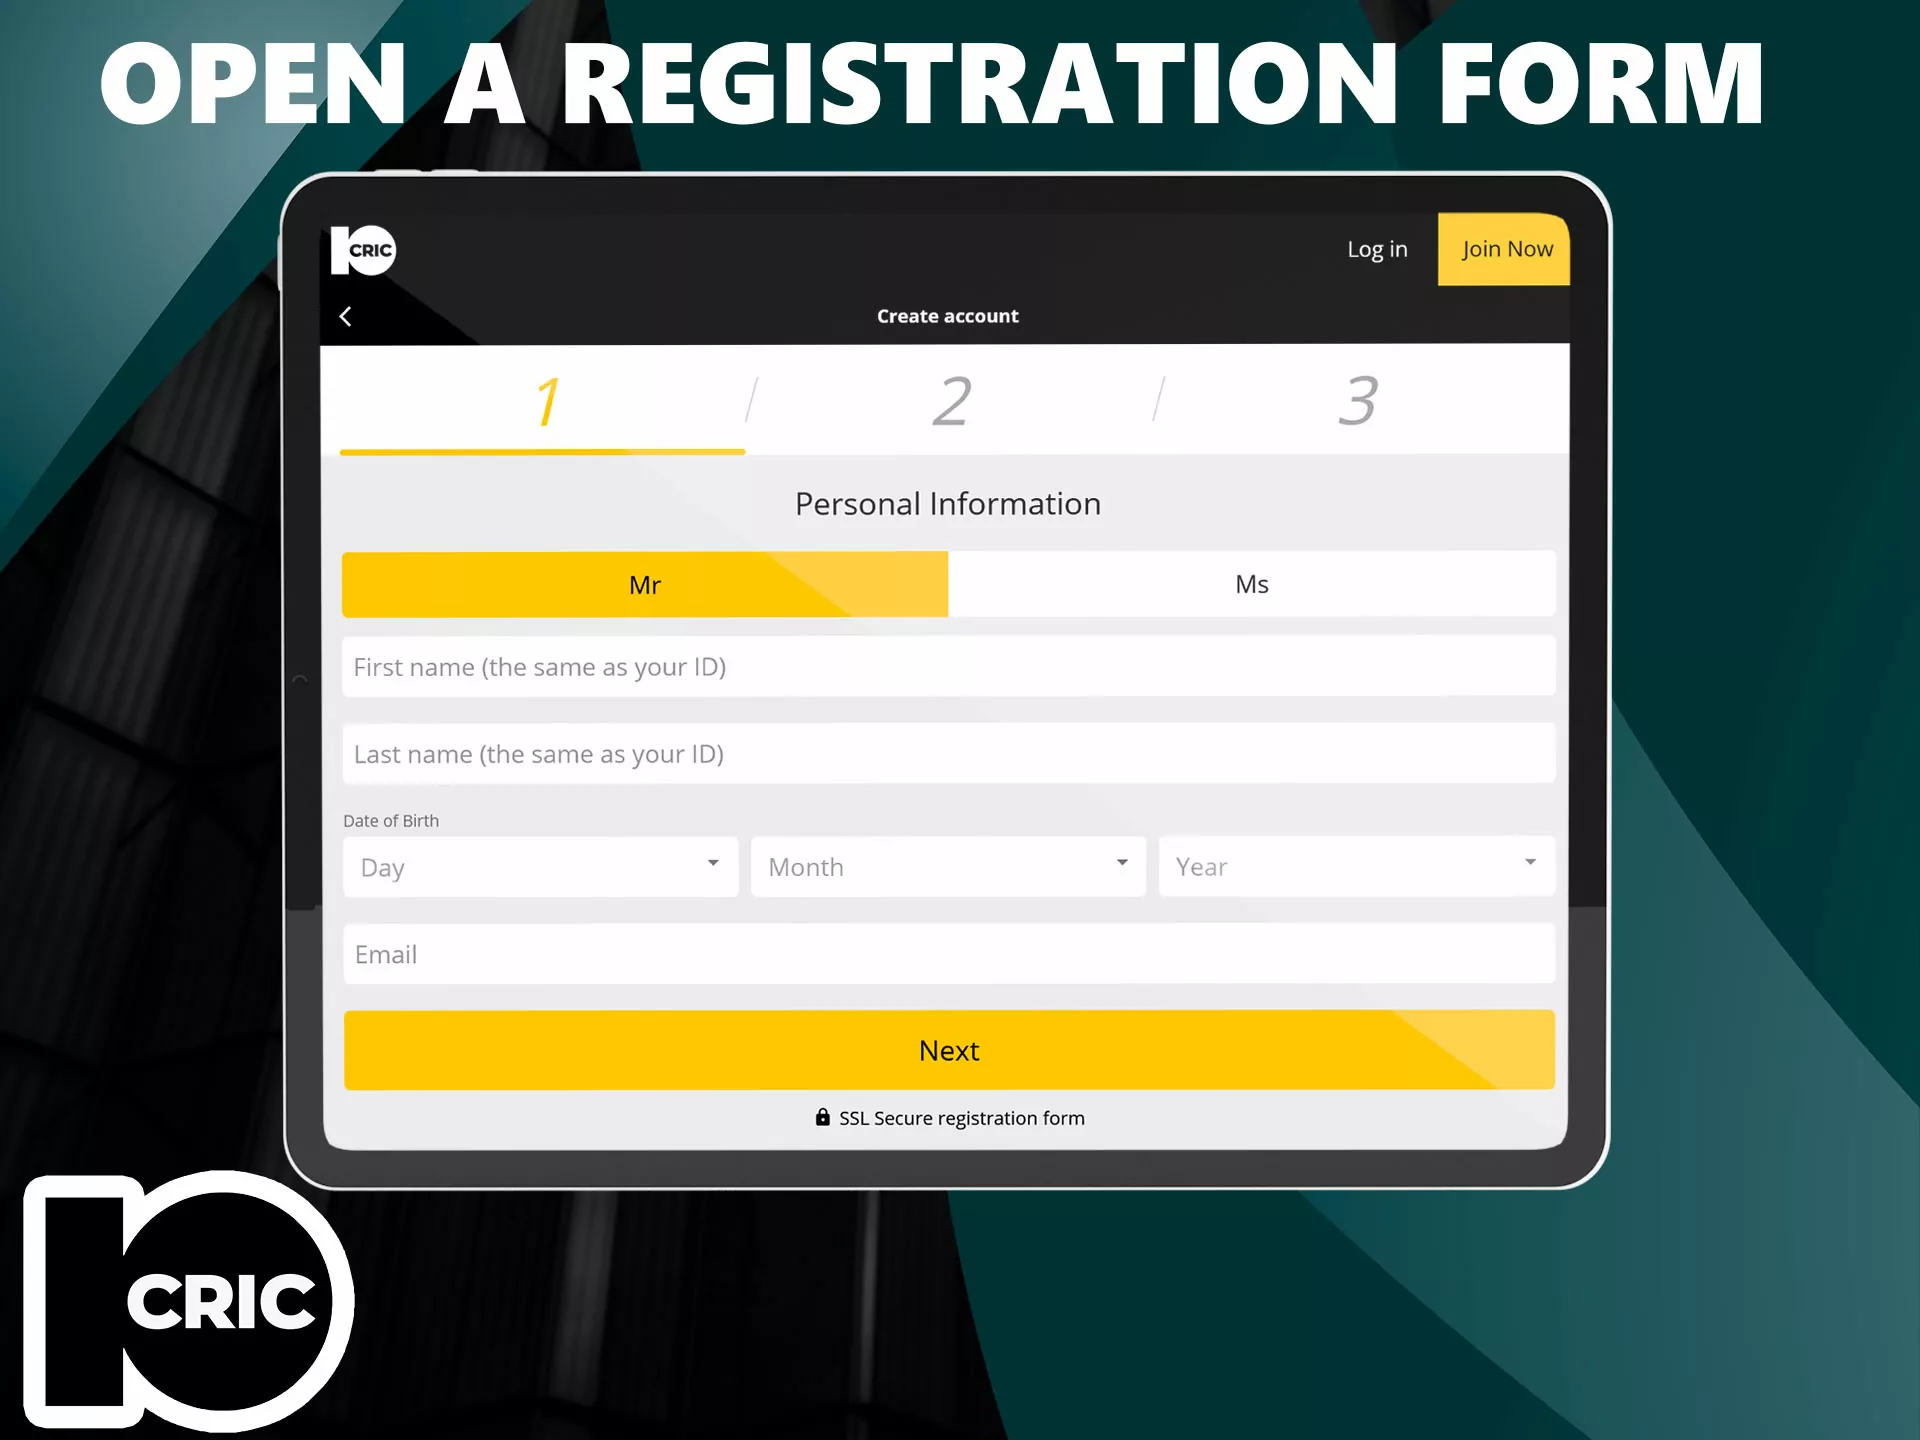 Then you can go to the registration form, just click on “Join now” in the header of the bookmaker.